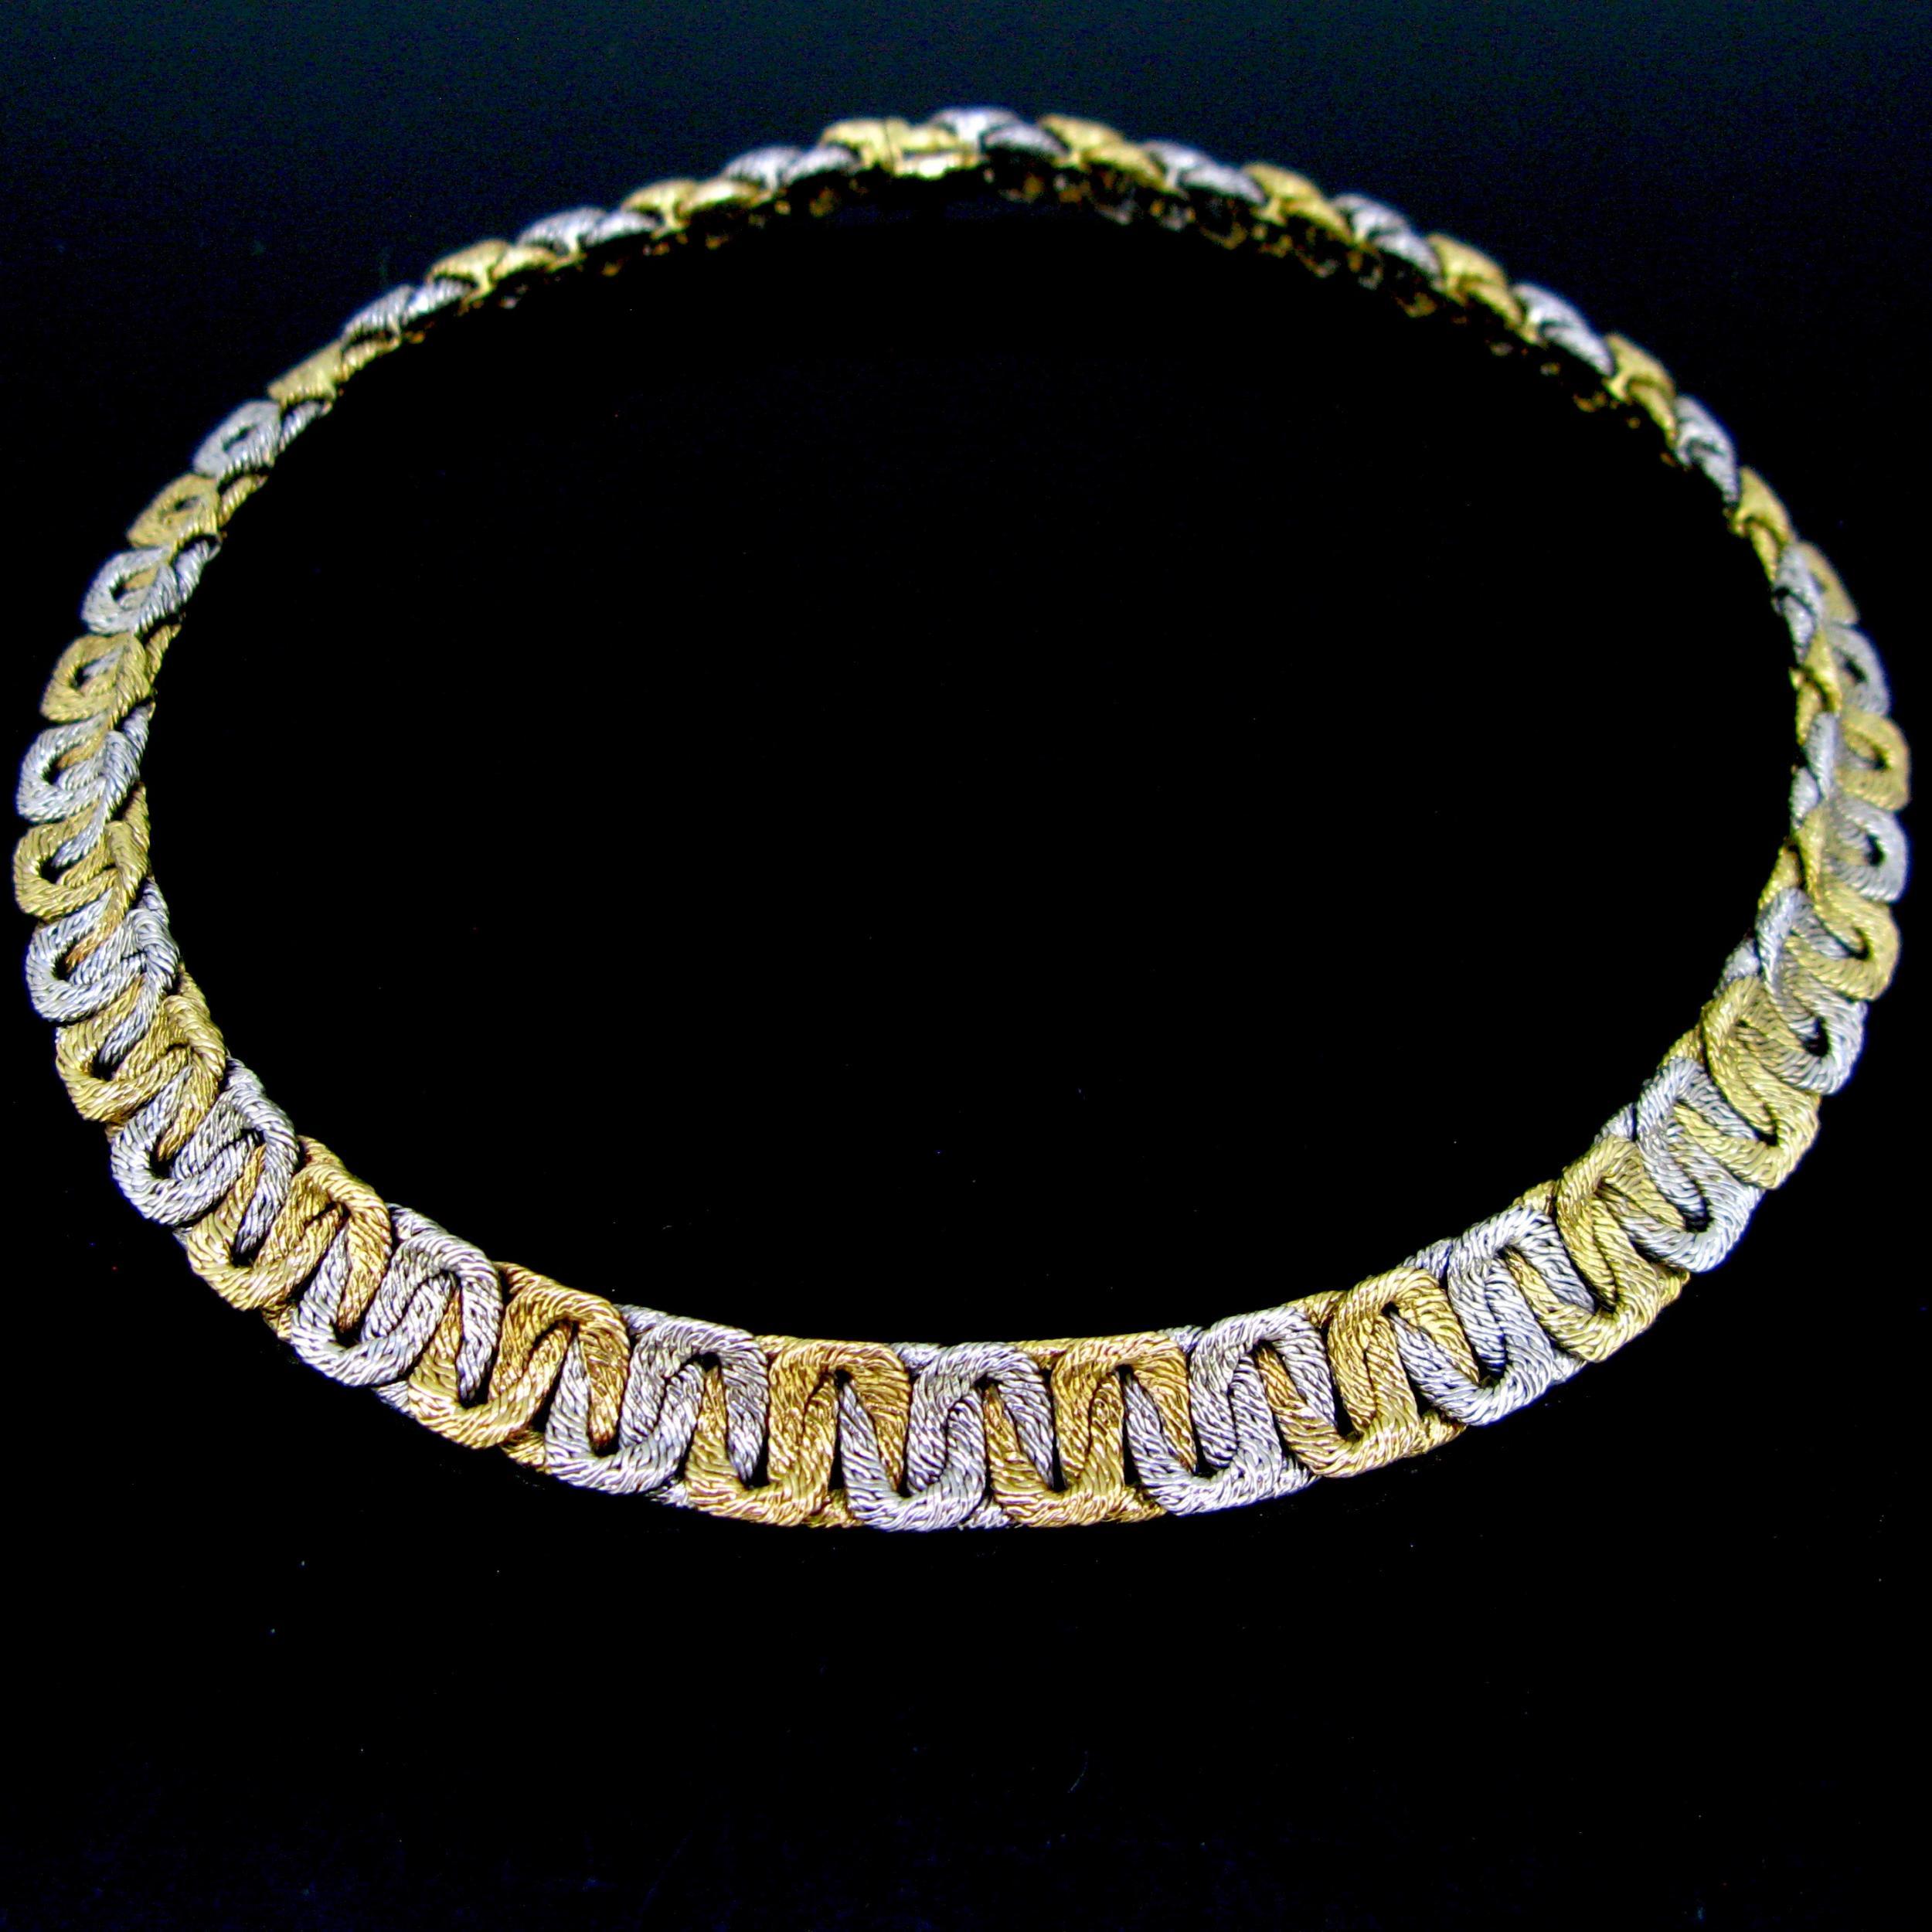 Weight:	104 gr



Metal:	18kt yellow and white gold



Condition:	Very good



Hallmarks:	French, the eagle’s head
	Maker’s mark: G / a dice above a wing/ L



Comments: 	This ravishing collar necklace from the Sixties is fully made in 18k yellow